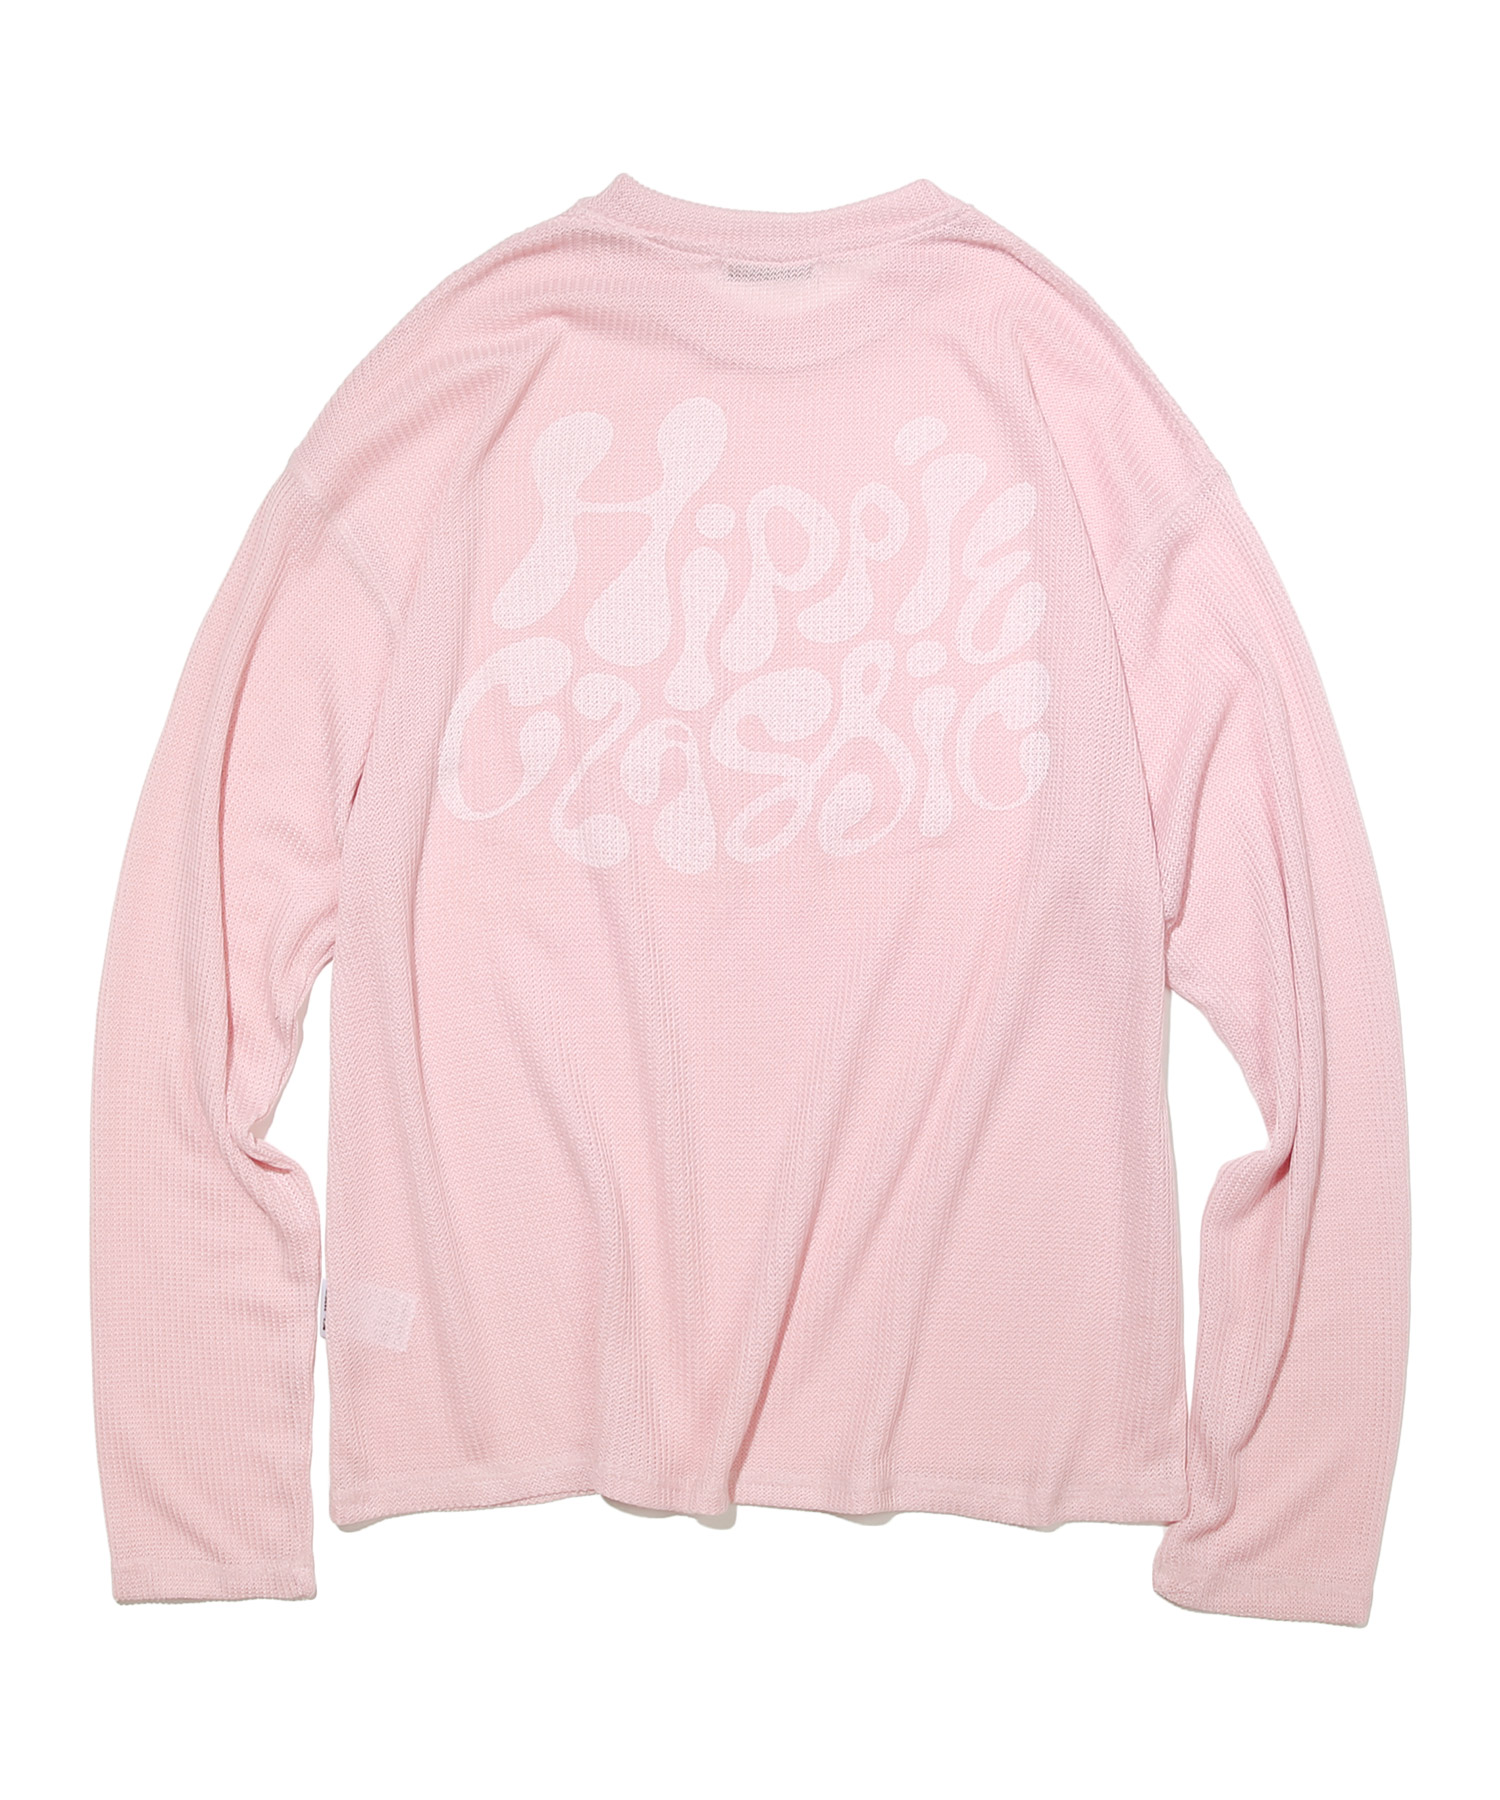 Hippie knit long sleeves  Pink